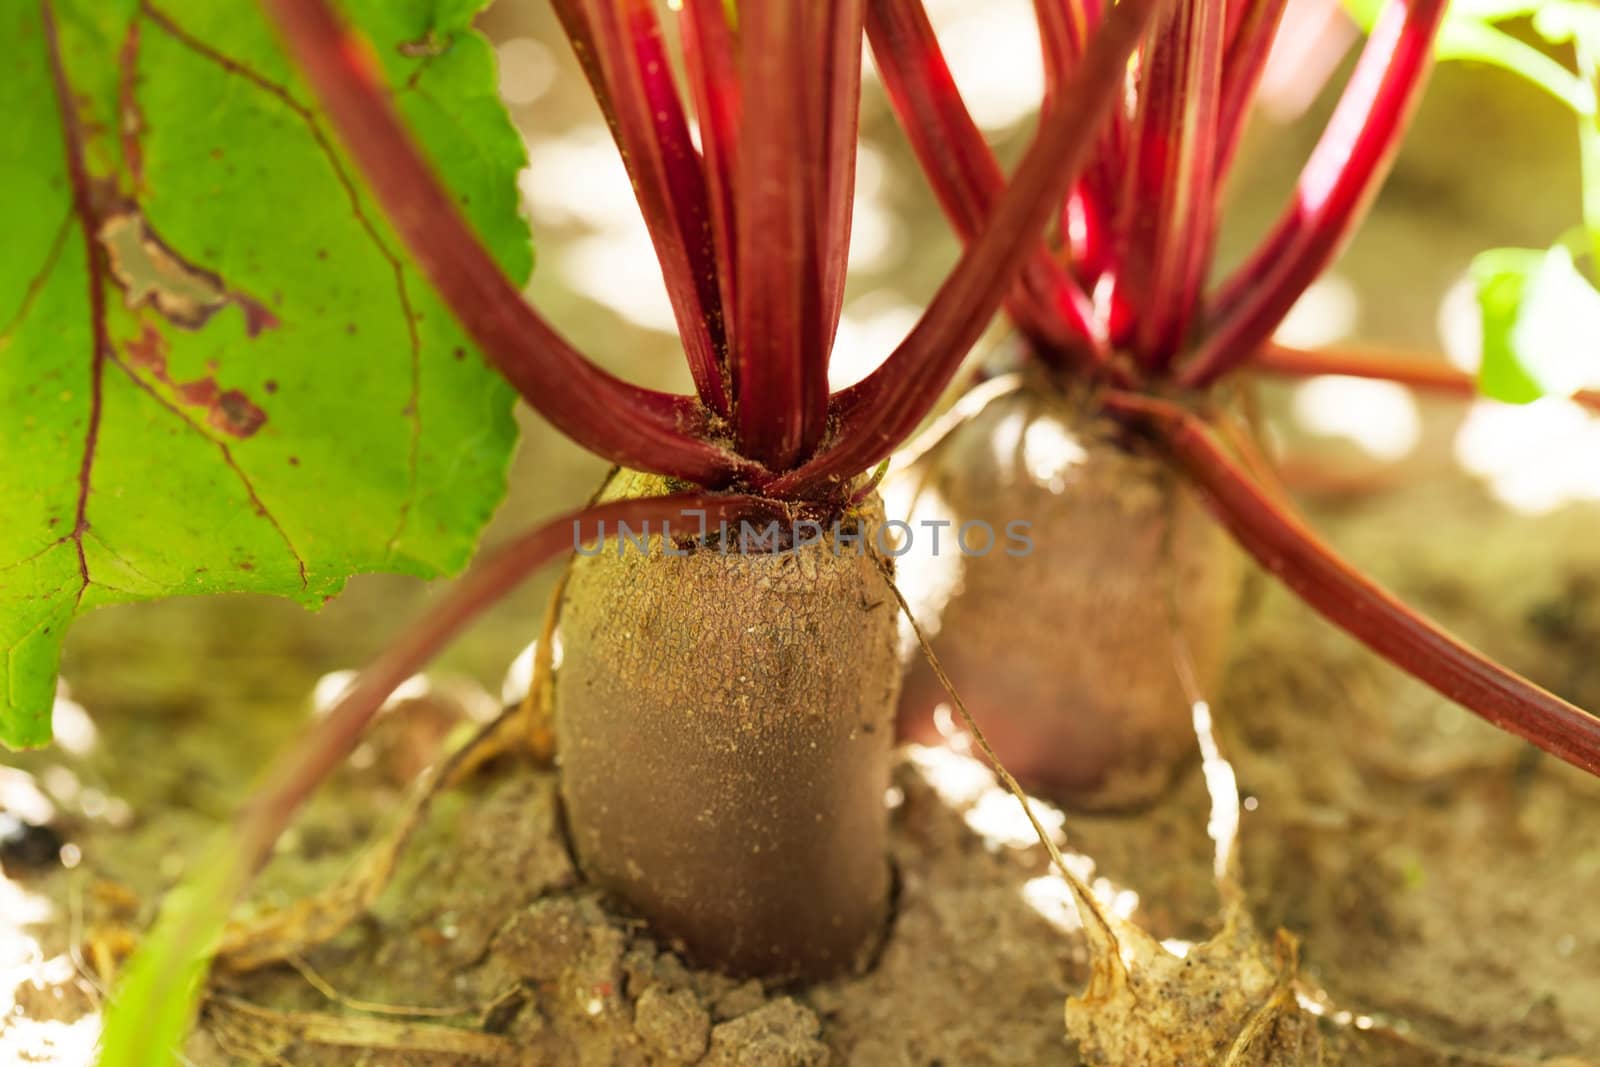 Beetroot in a vegetable garden  by shebeko